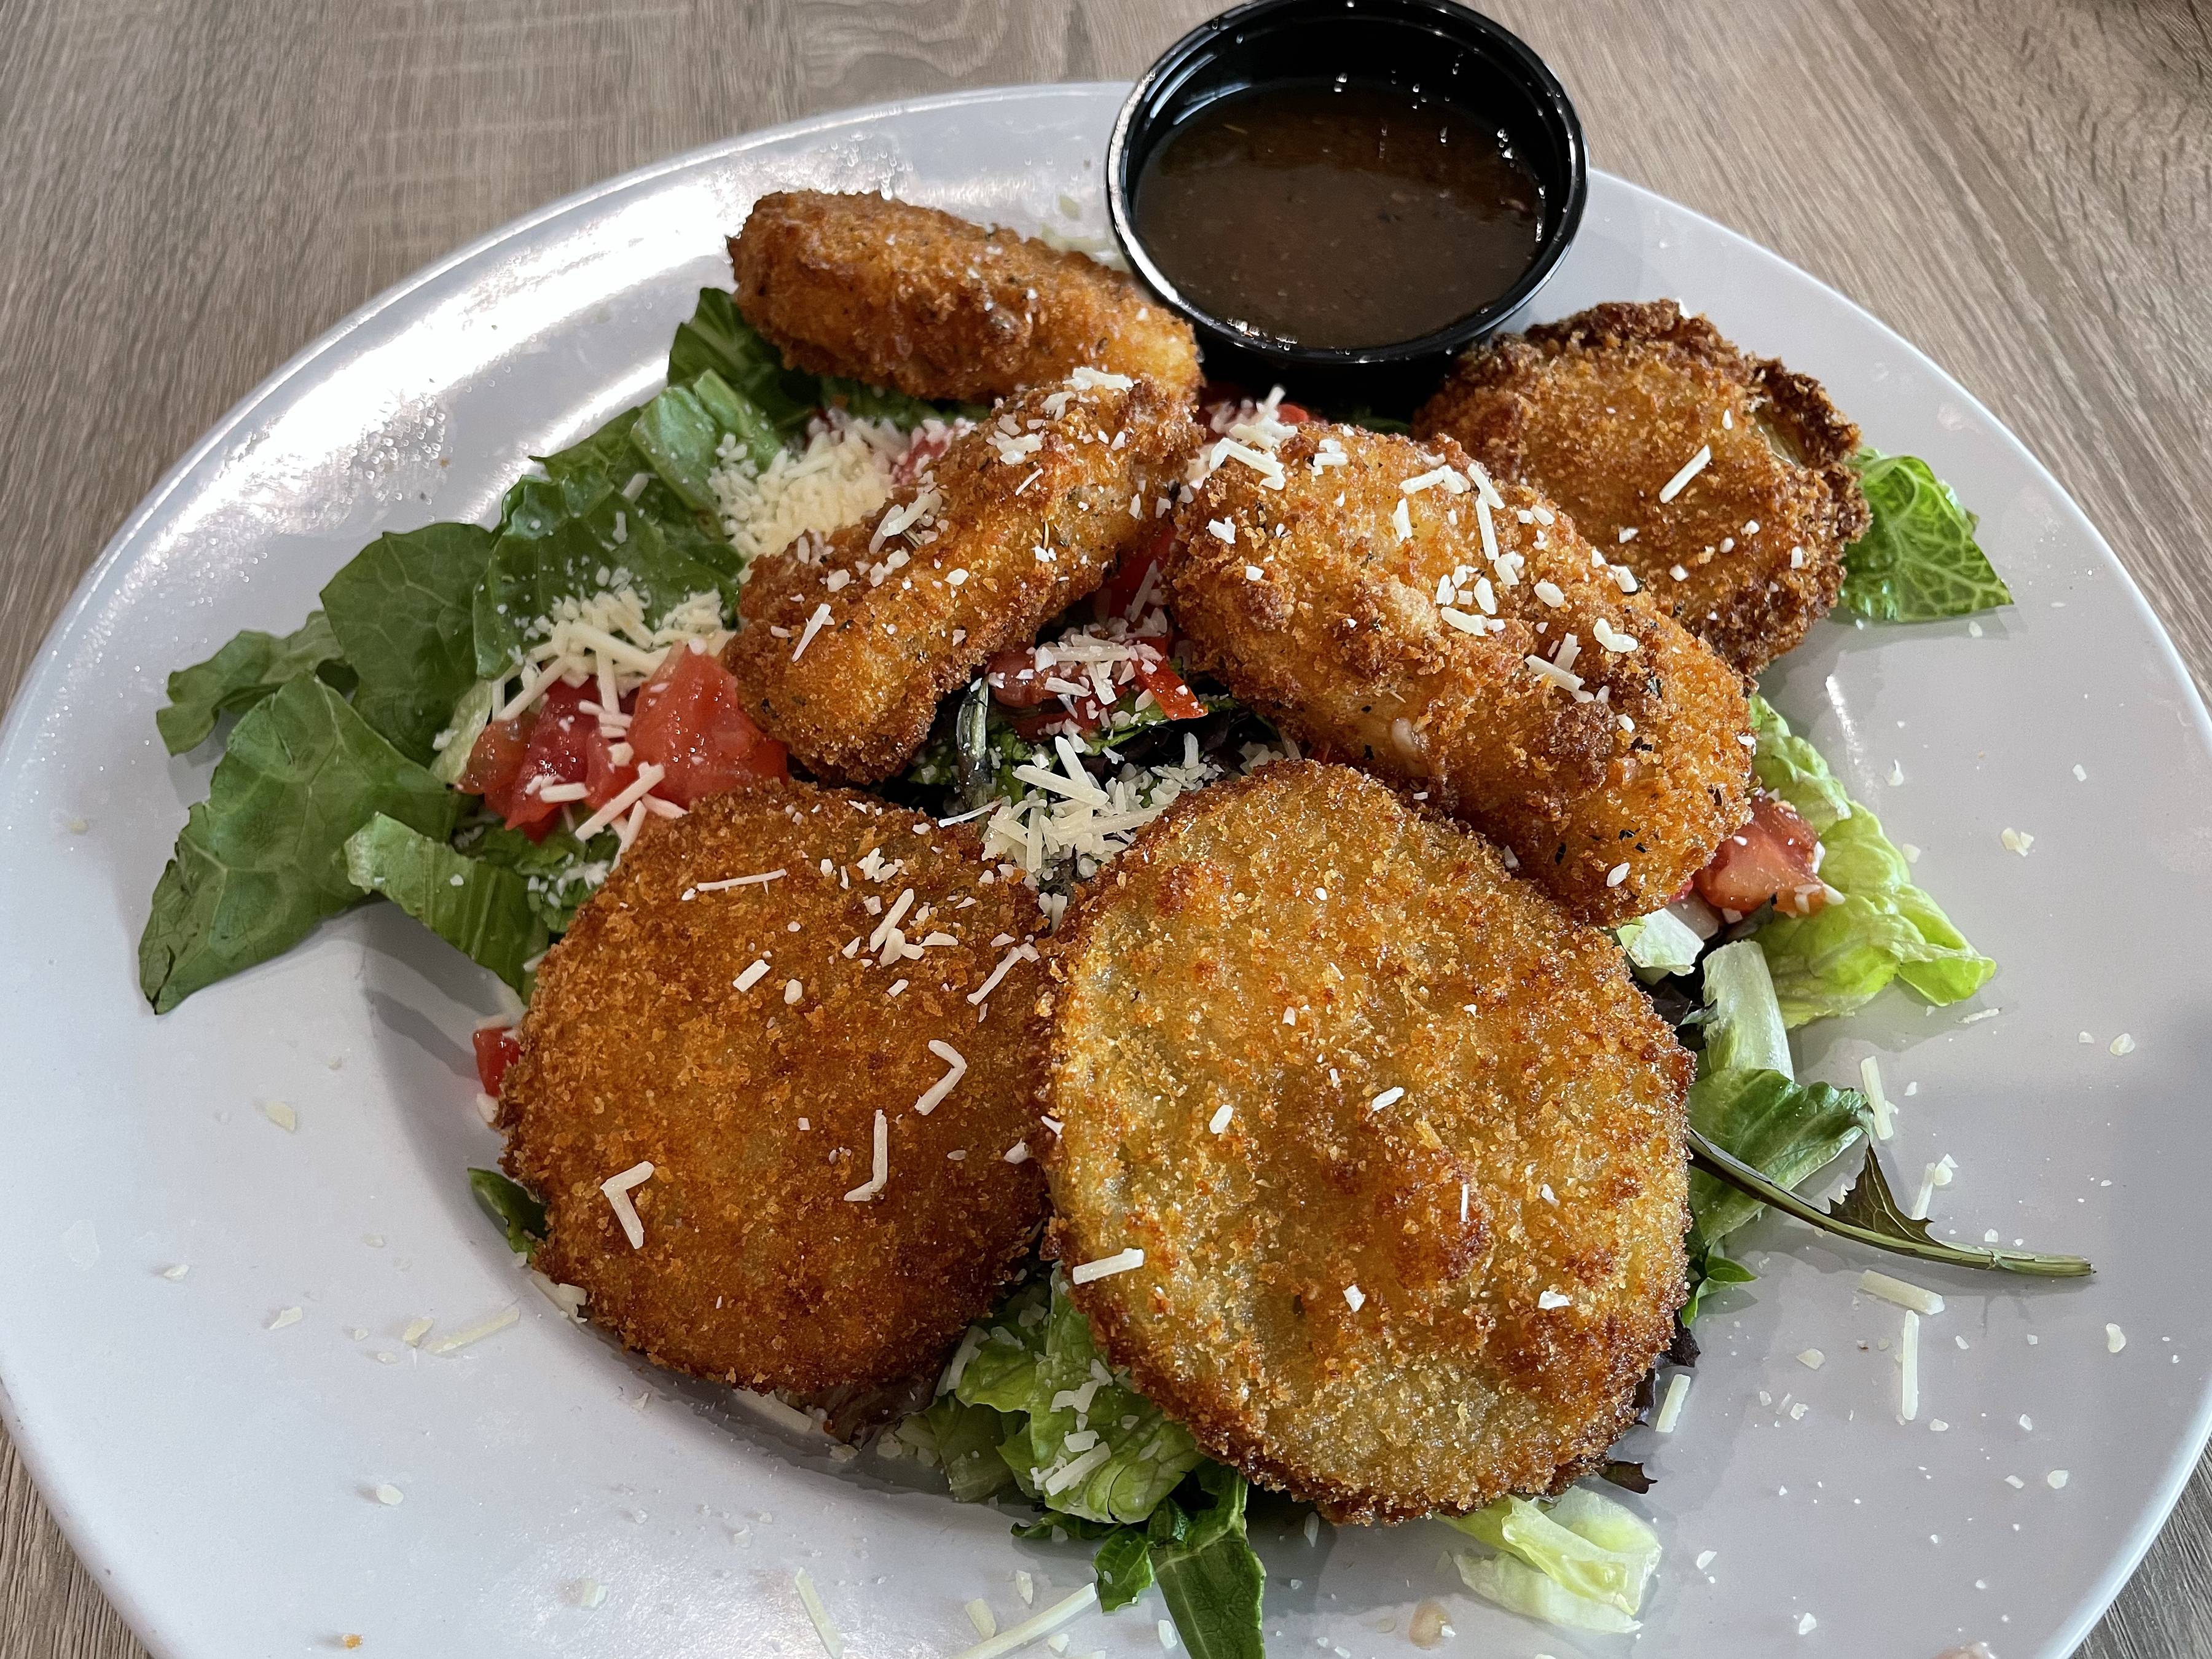 Is a salad still healthy if it's topped with deliciously crusty fried goodies, three each fried mozzarella and fried green tomatoes?